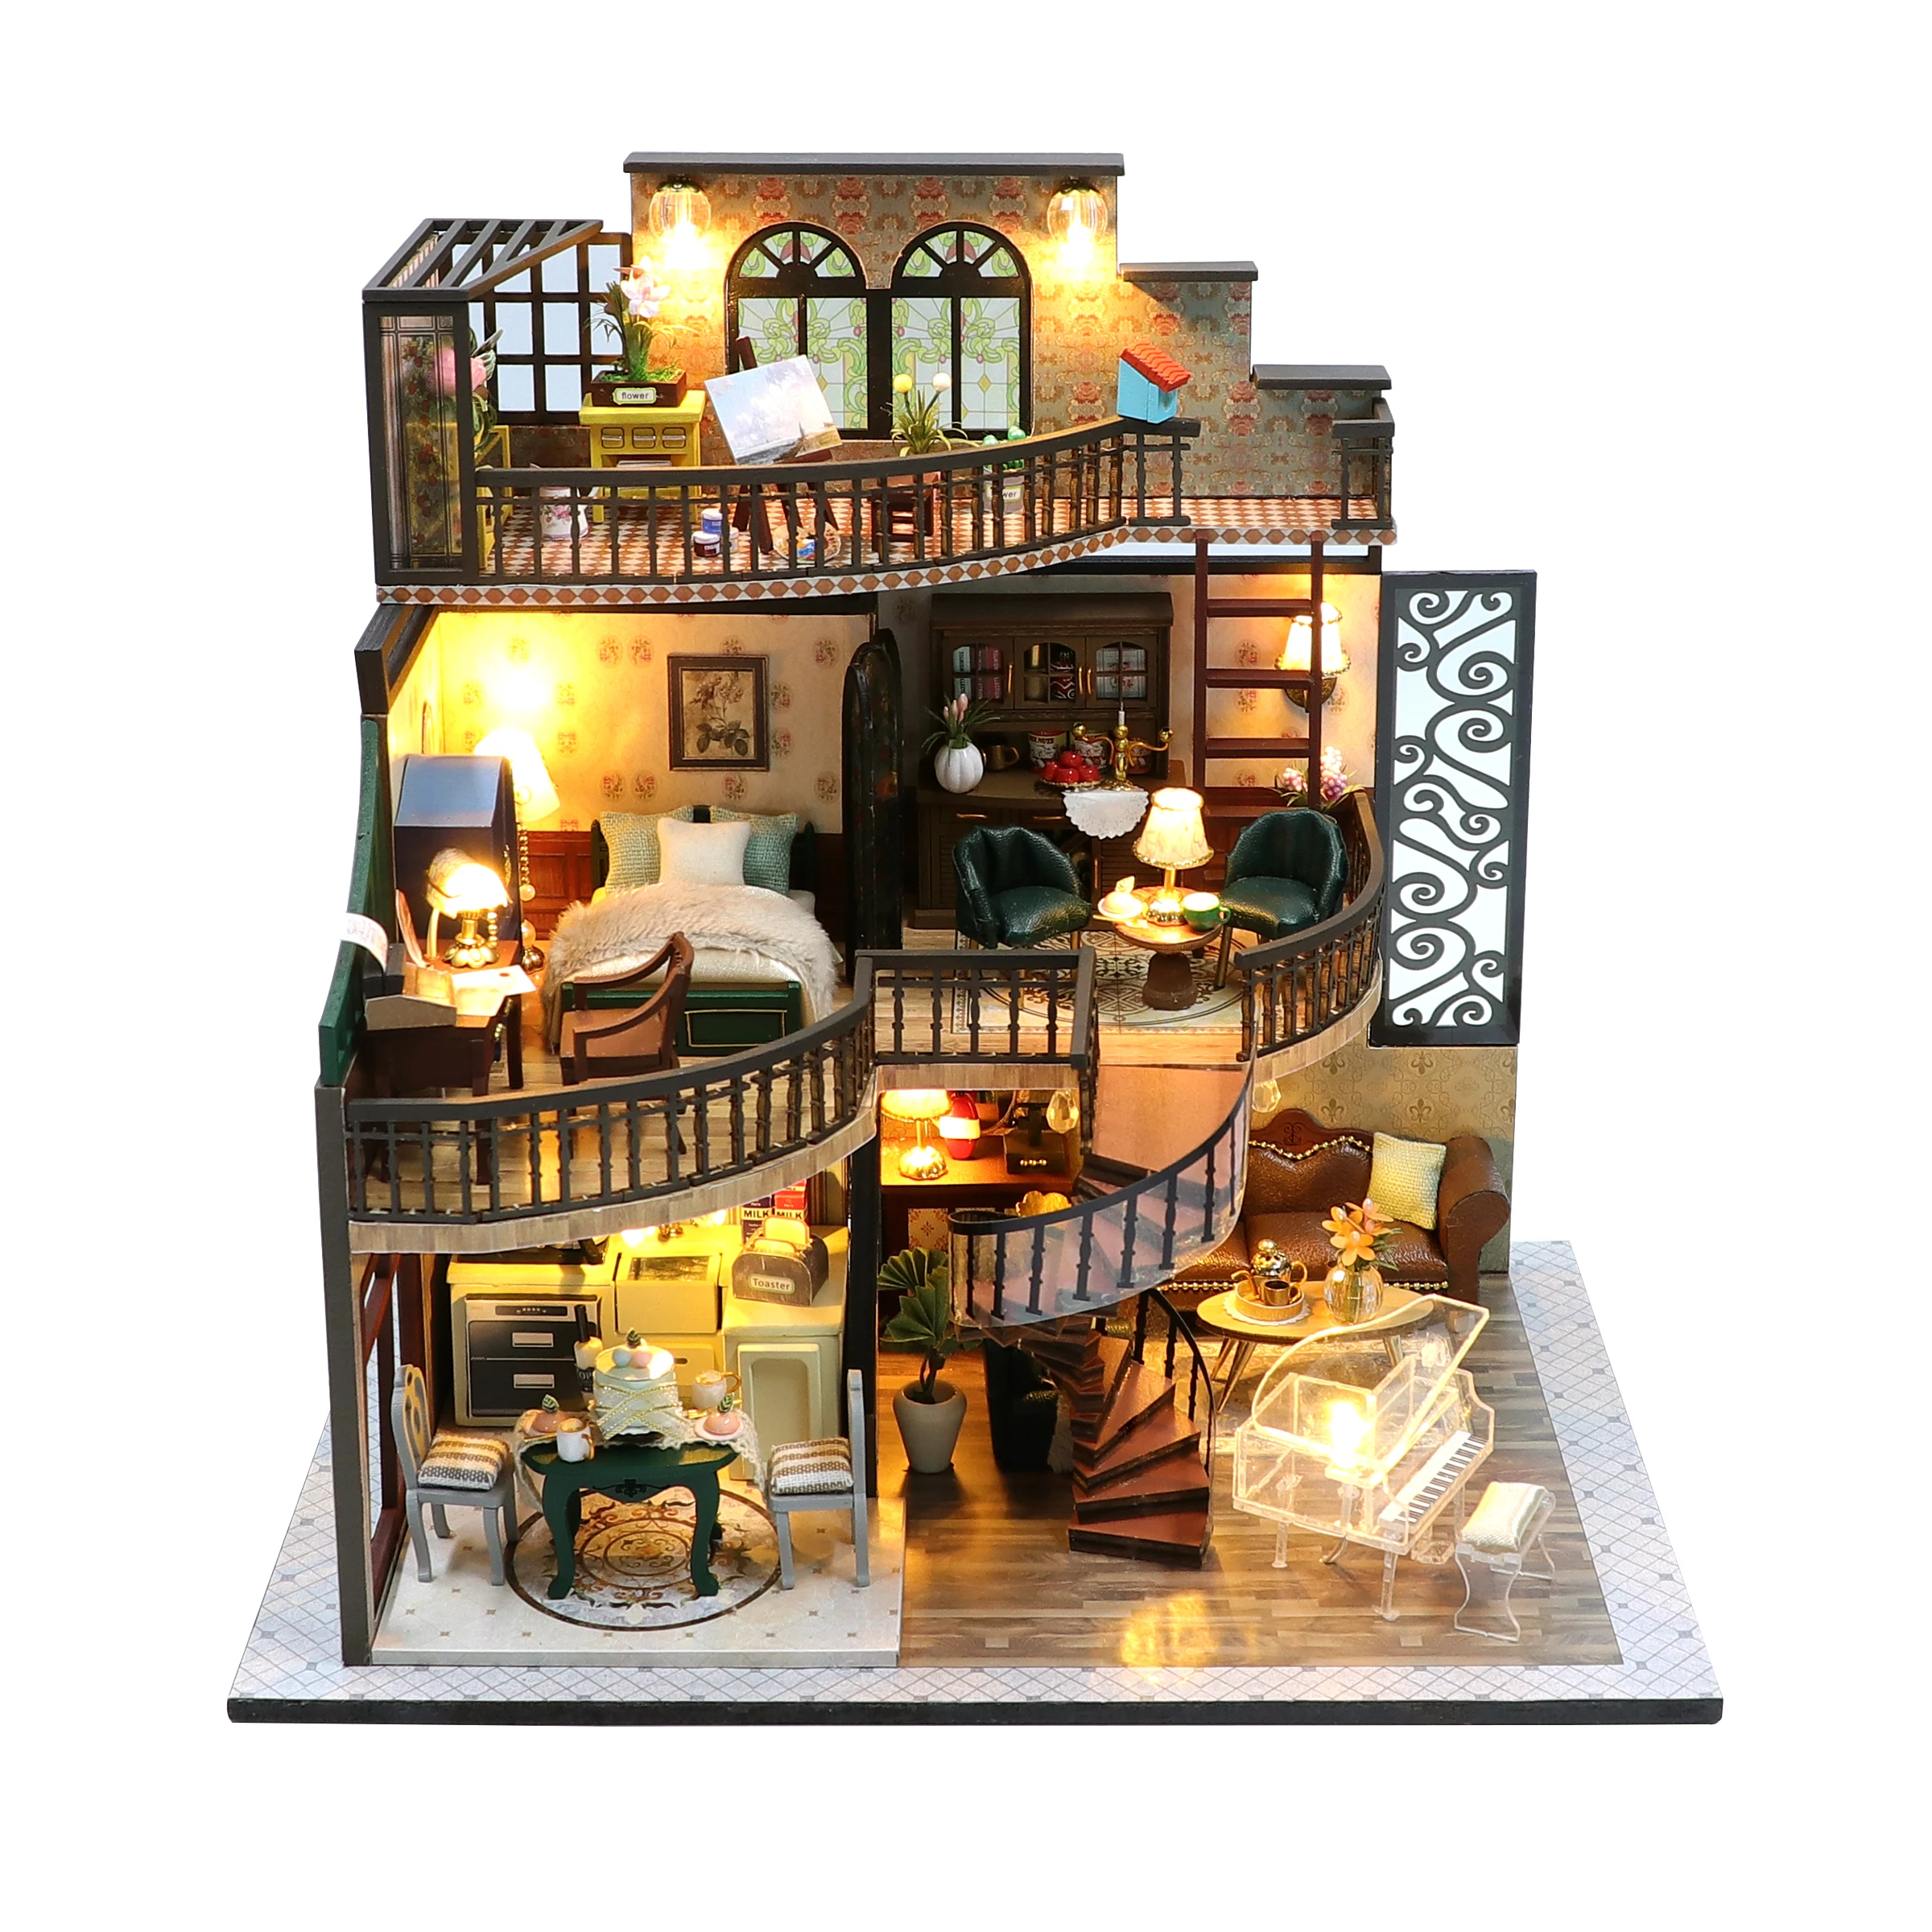 

DIY Wooden Doll House Miniature Building Kits Ancient Loft Casa With Dollhouse Furniture Light Toys for Girls Birthday Gifts